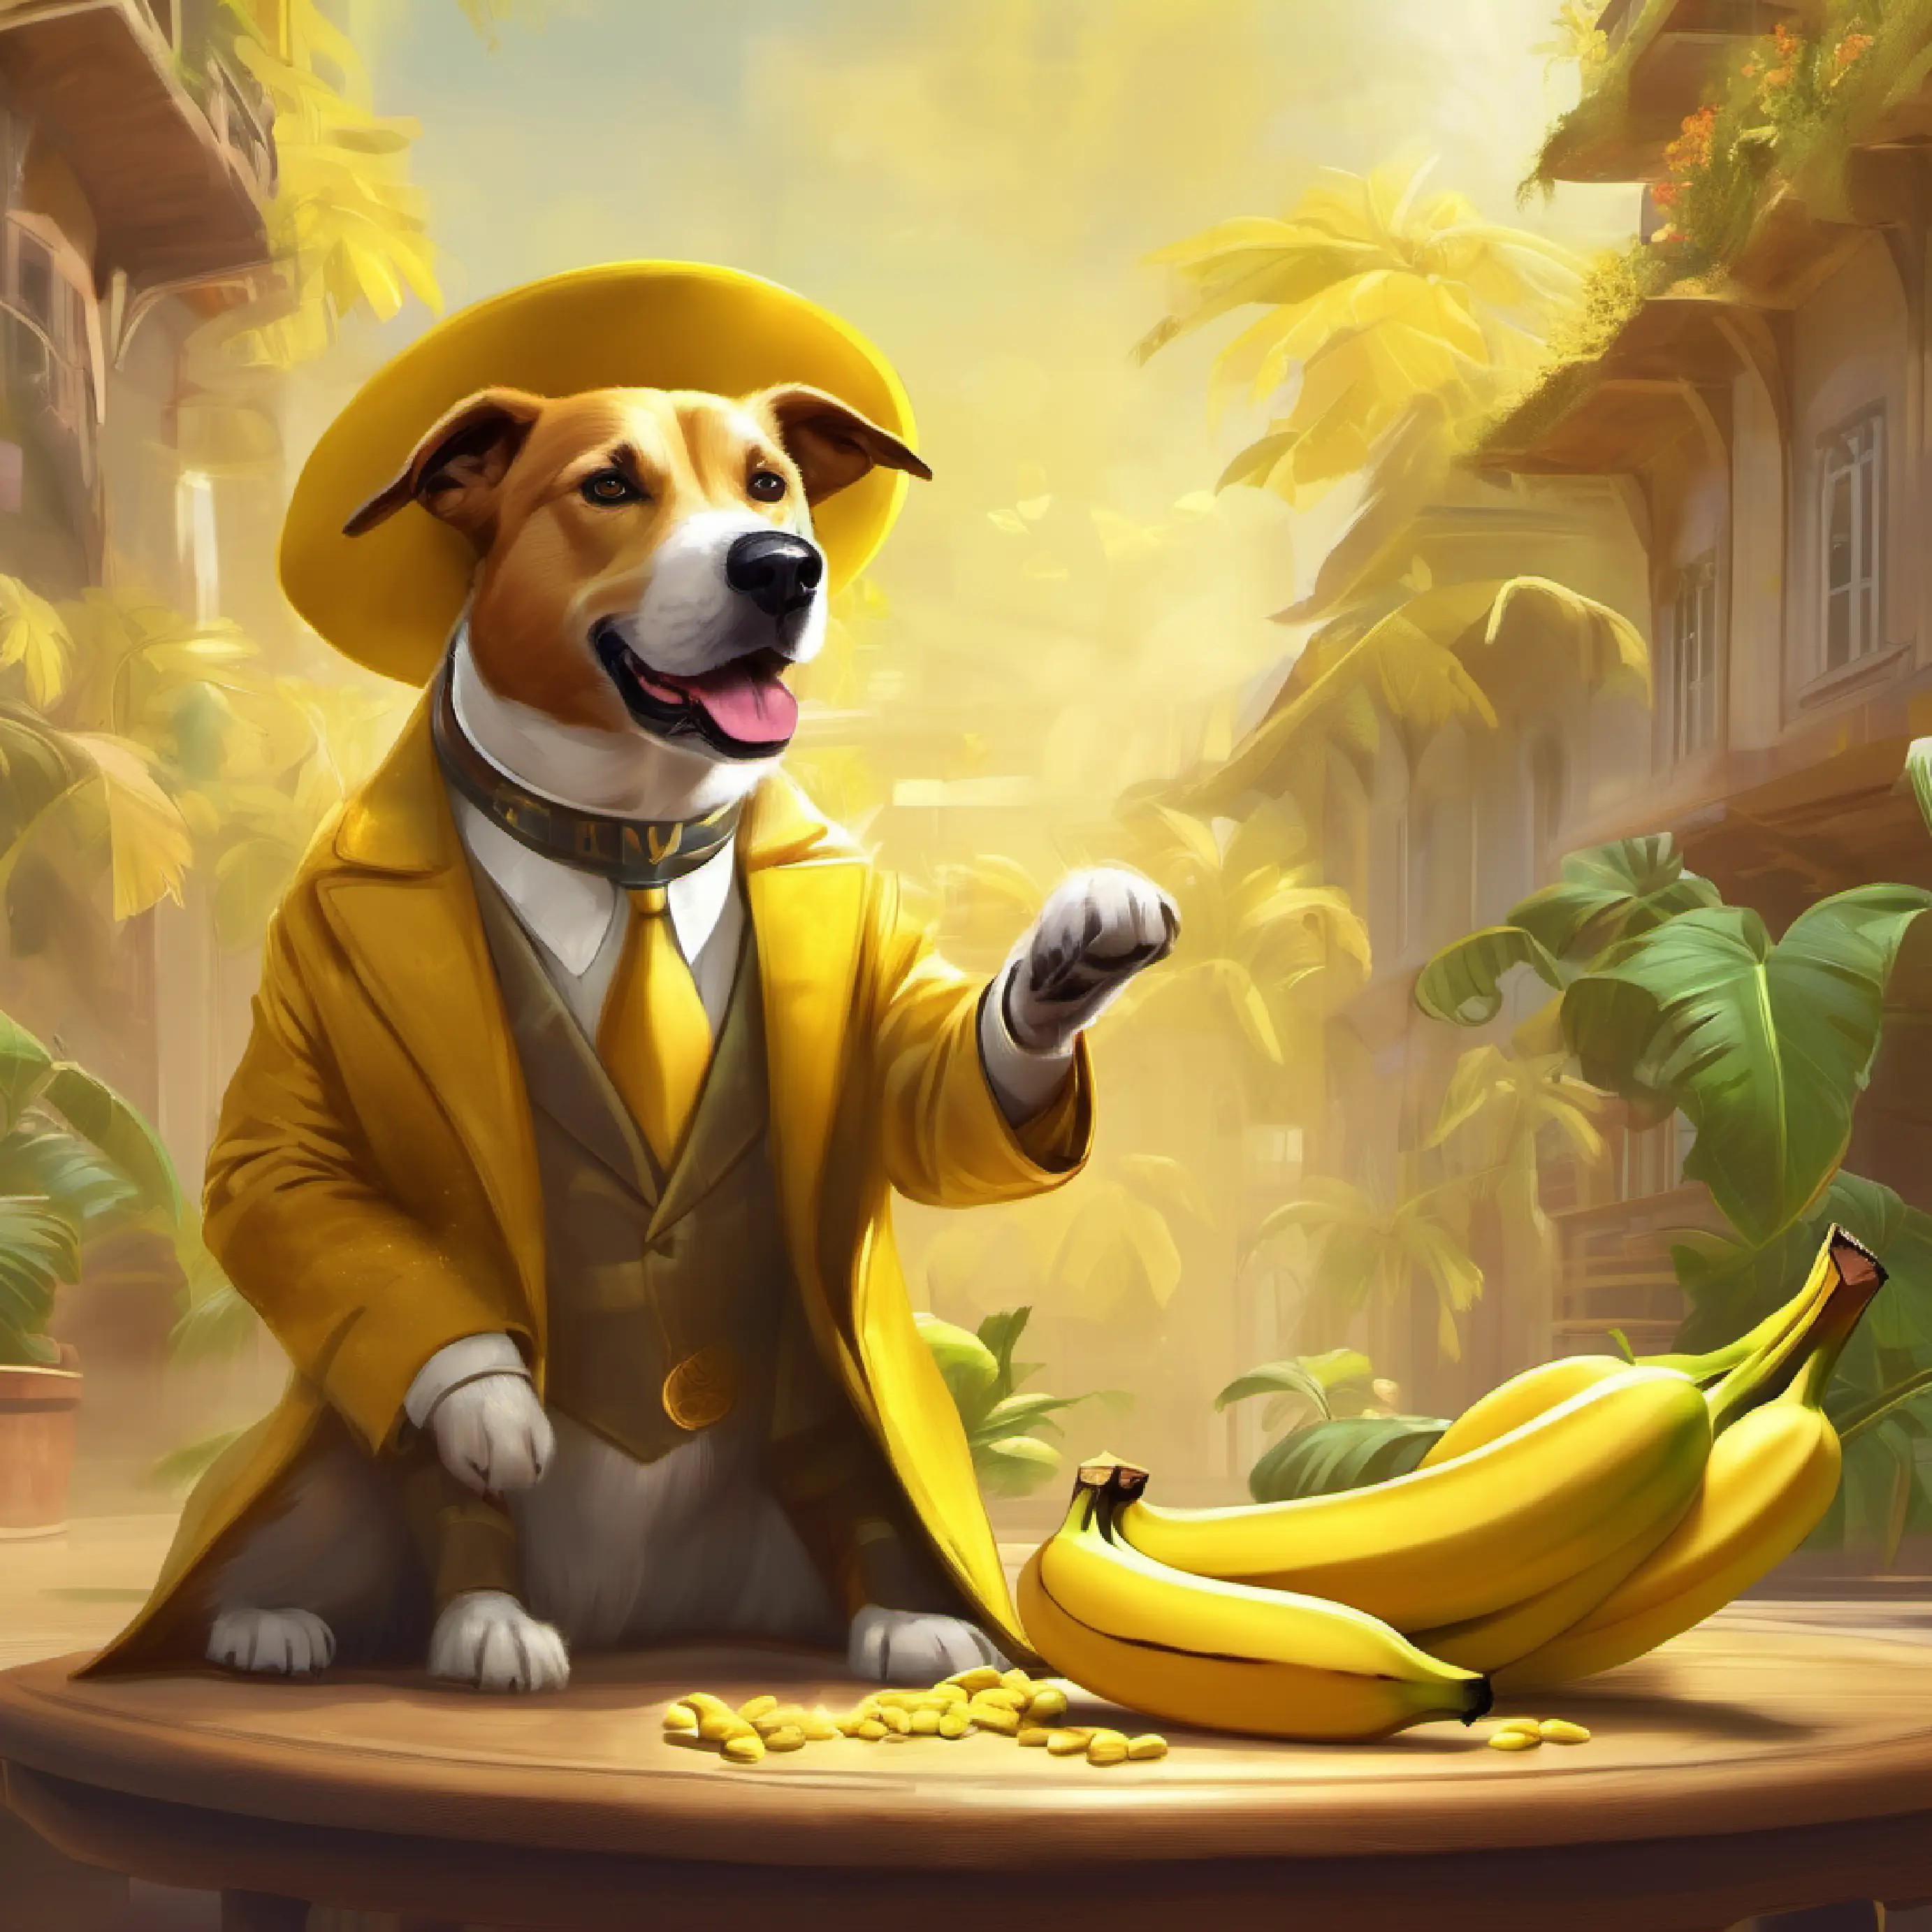 Conclusion, Golden coat, loves bananas, smart dog is happy with his new role.